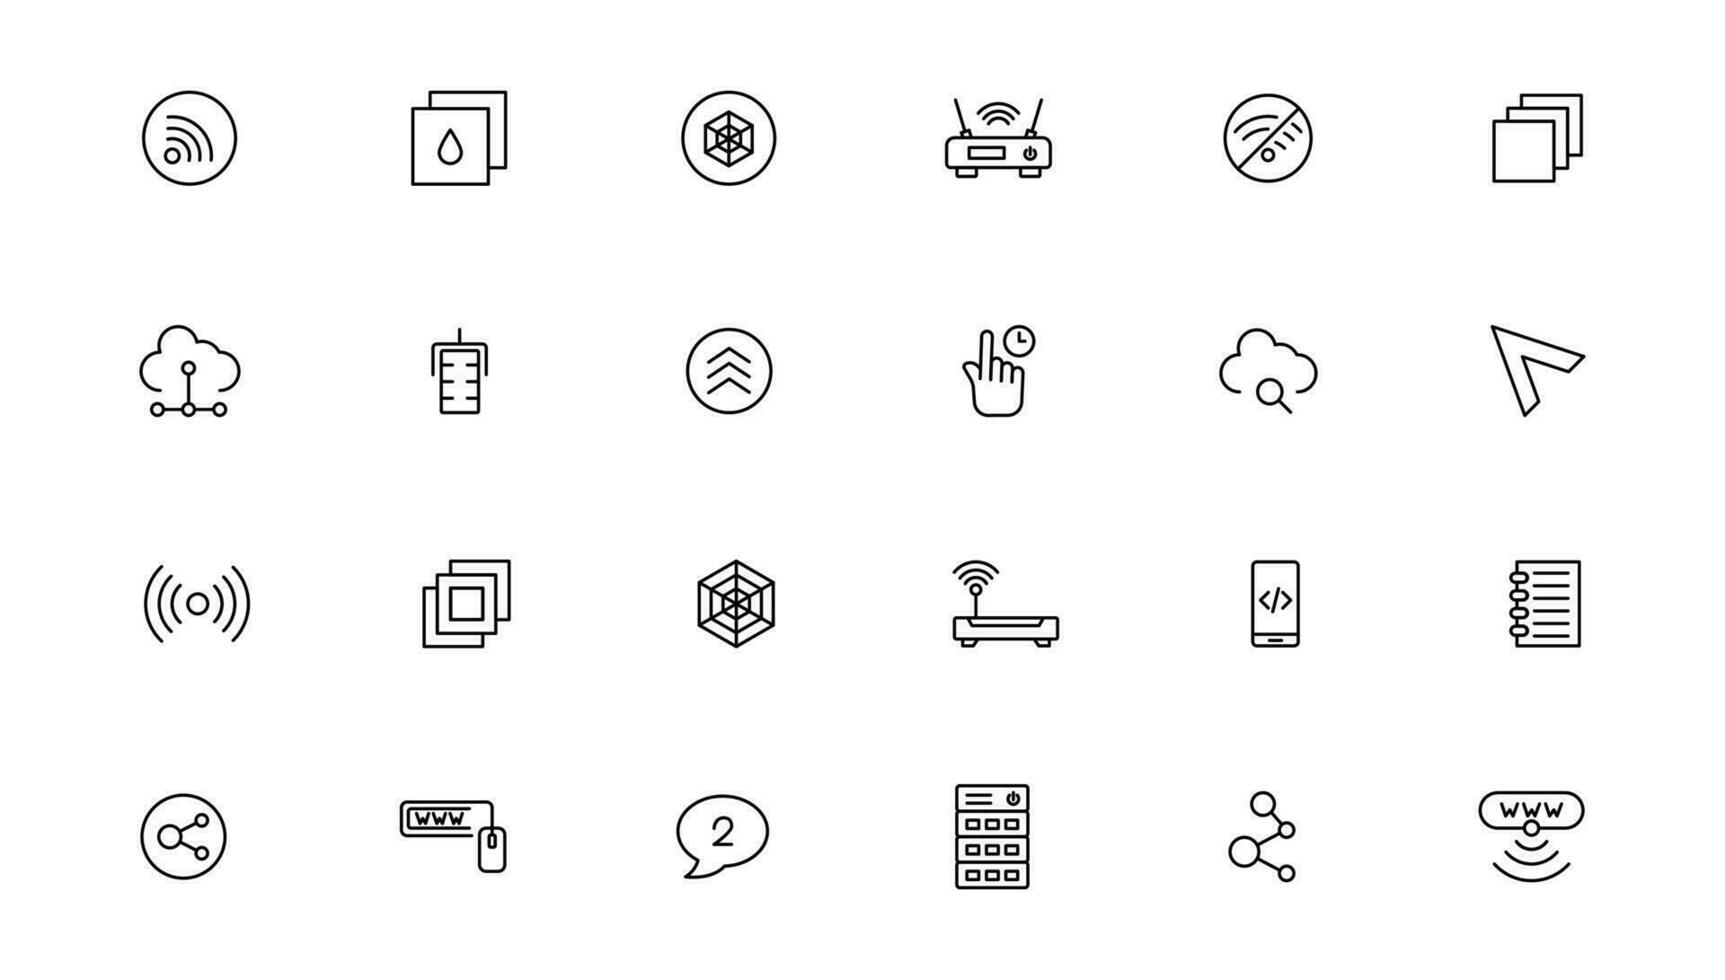 Set of line icons related to data exchange, traffic, files, cloud, server. Outline icon collection. Editable stroke. Vector illustration